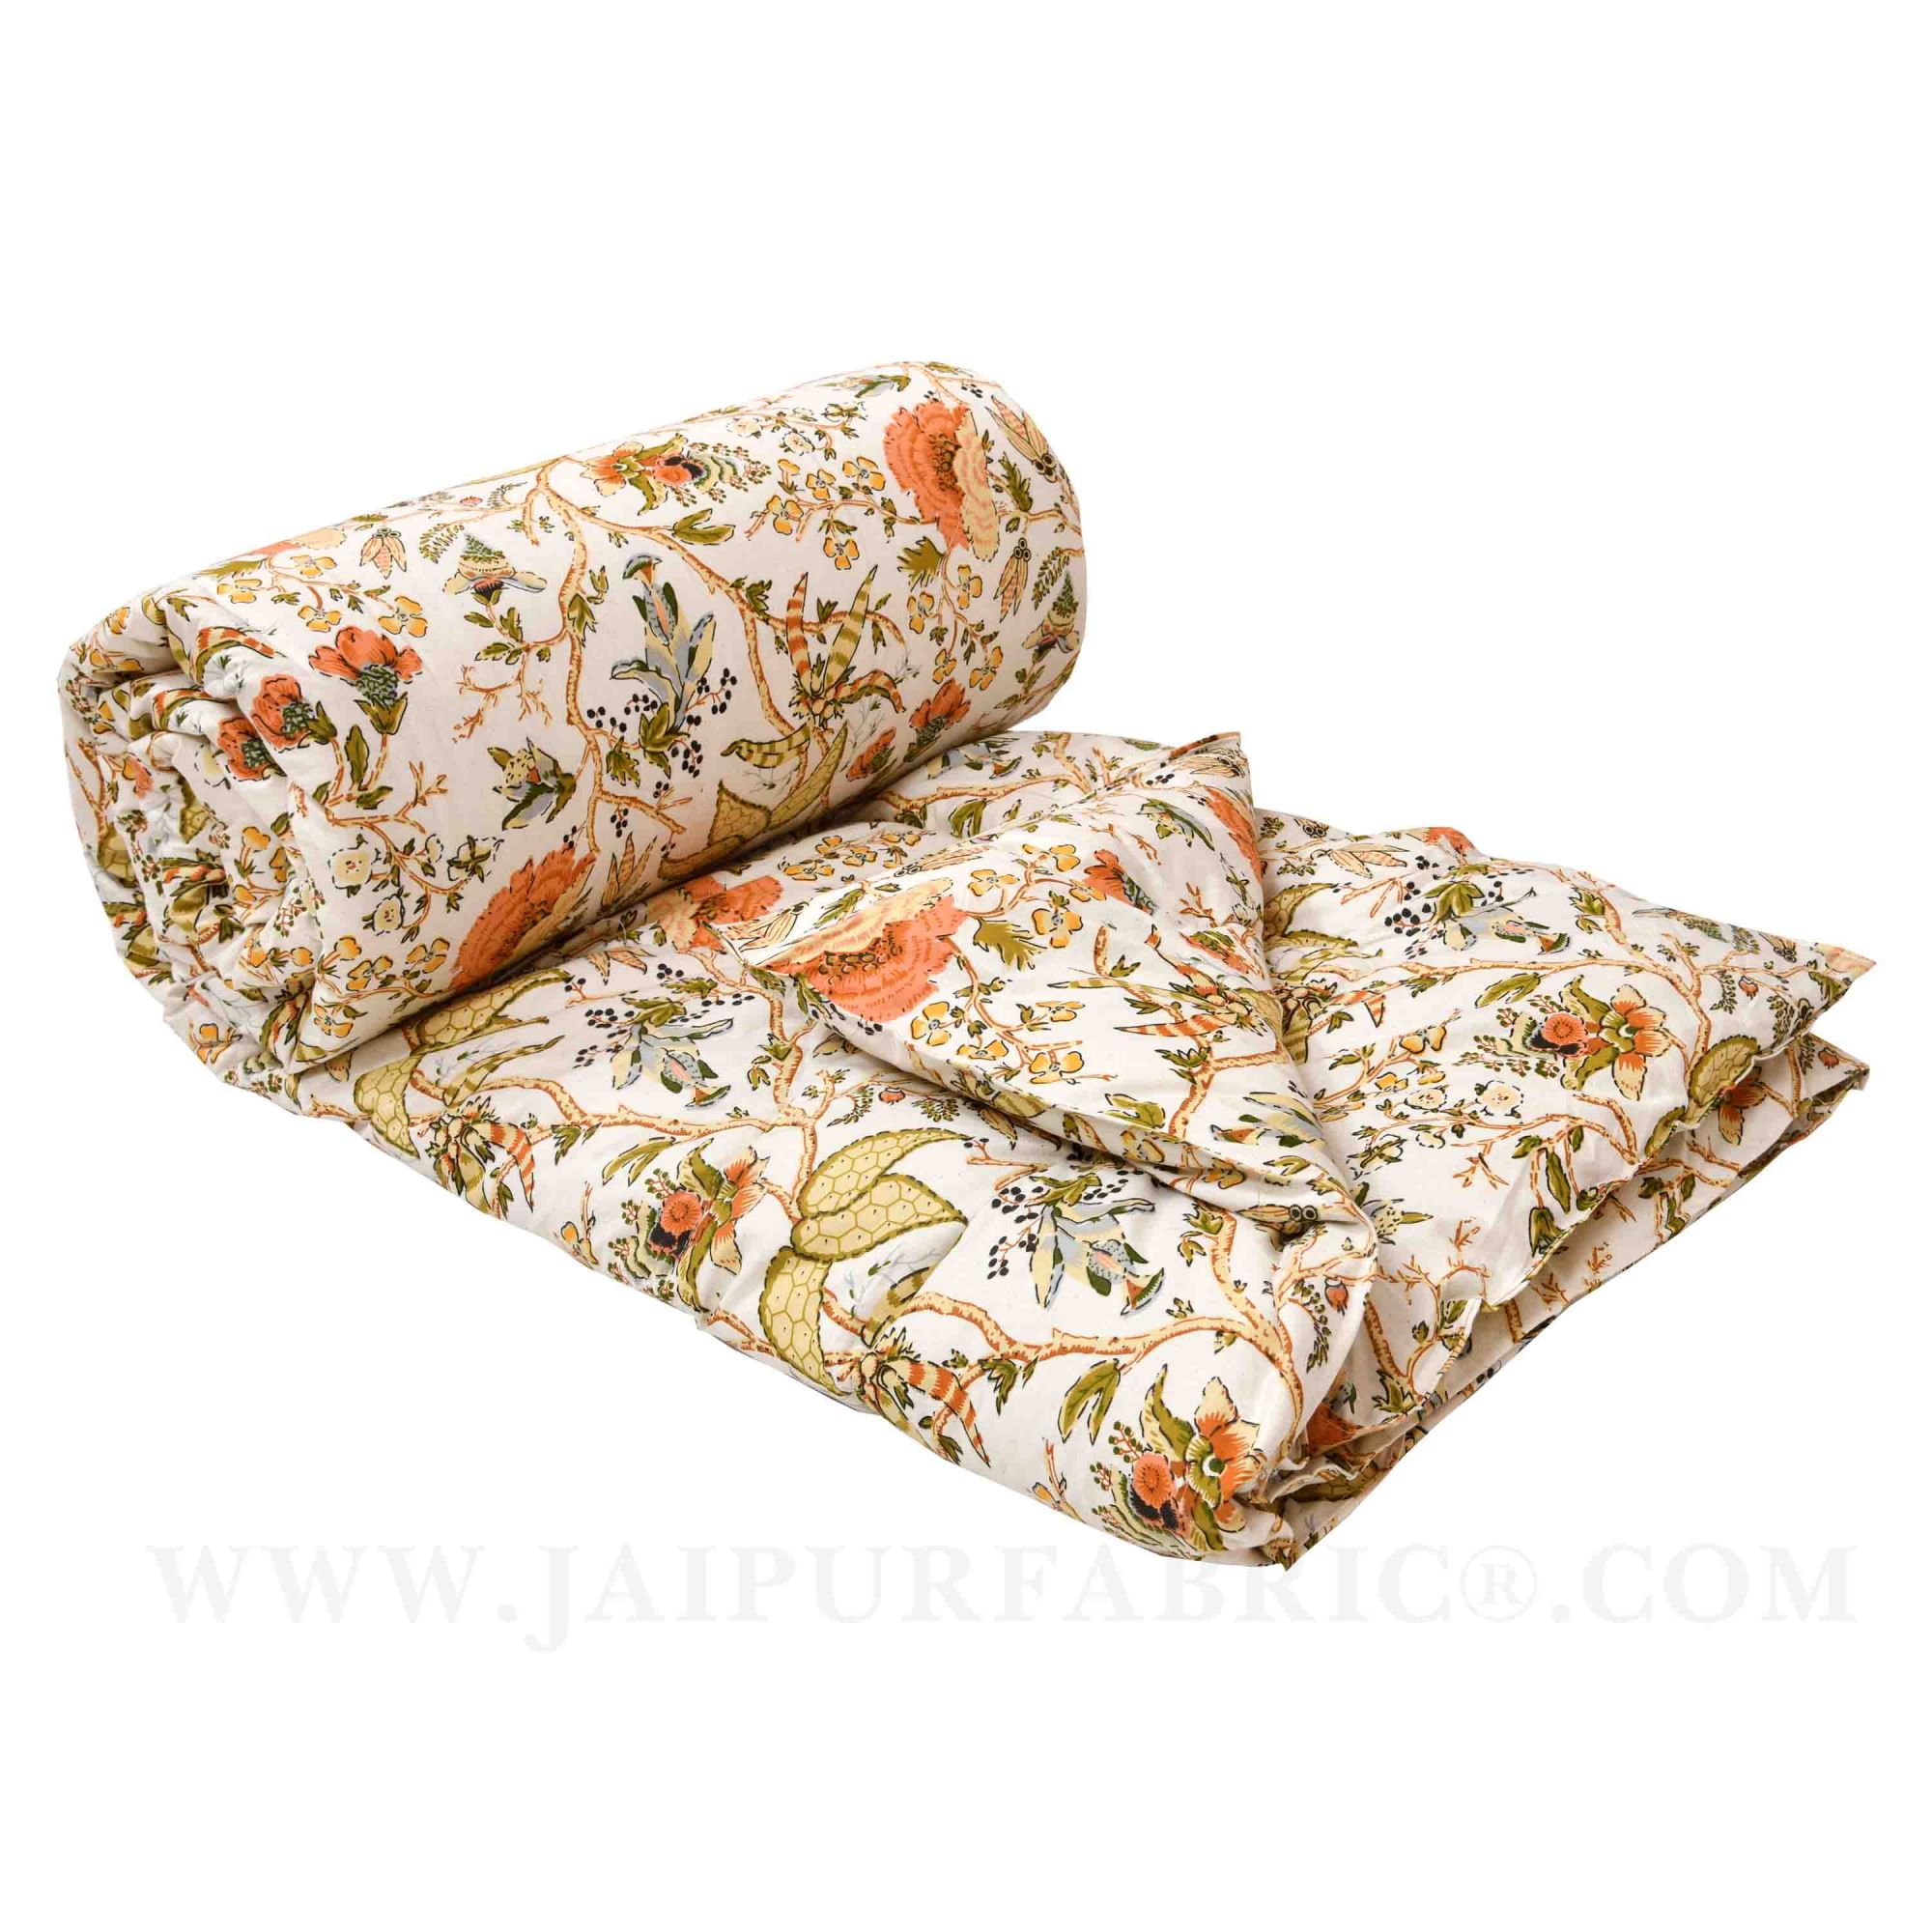 JaipurFabric® Anokhi Print Peachy Floral Double Bed Comforter